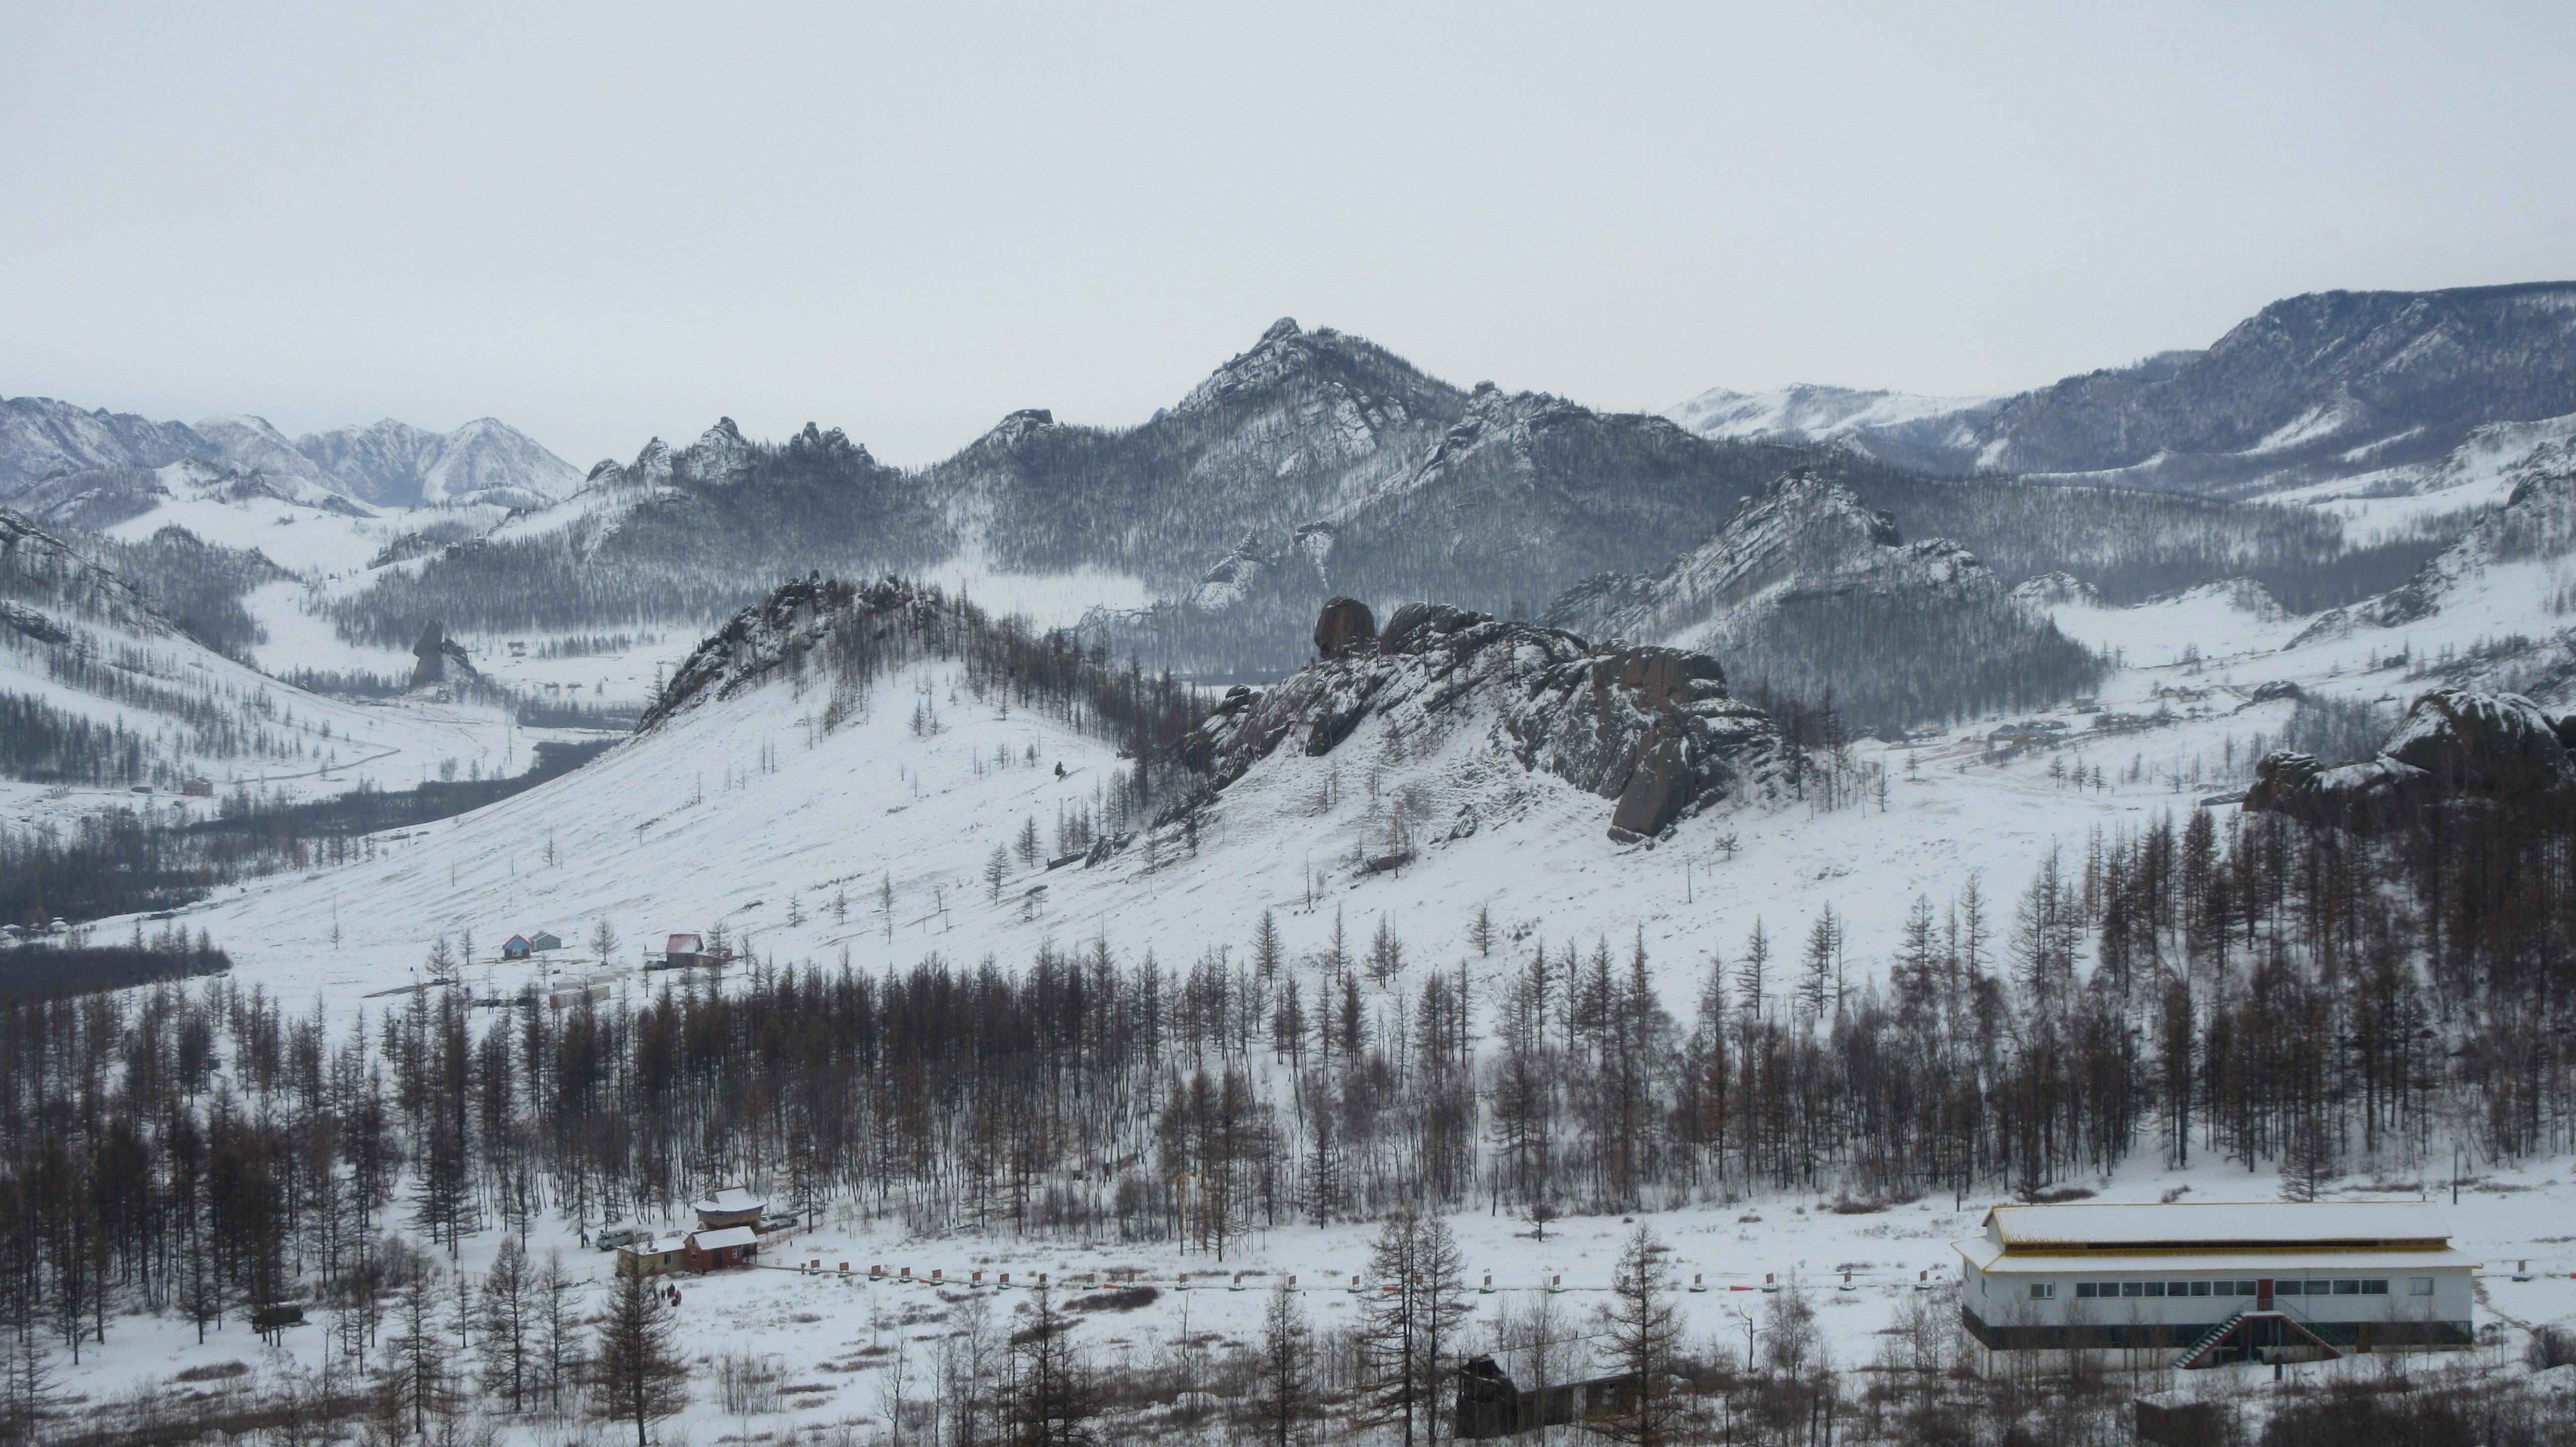 SNOWY EXPERIENCE. The snow covered trees, rock formations and mountains of Terelj Park are picturesque 